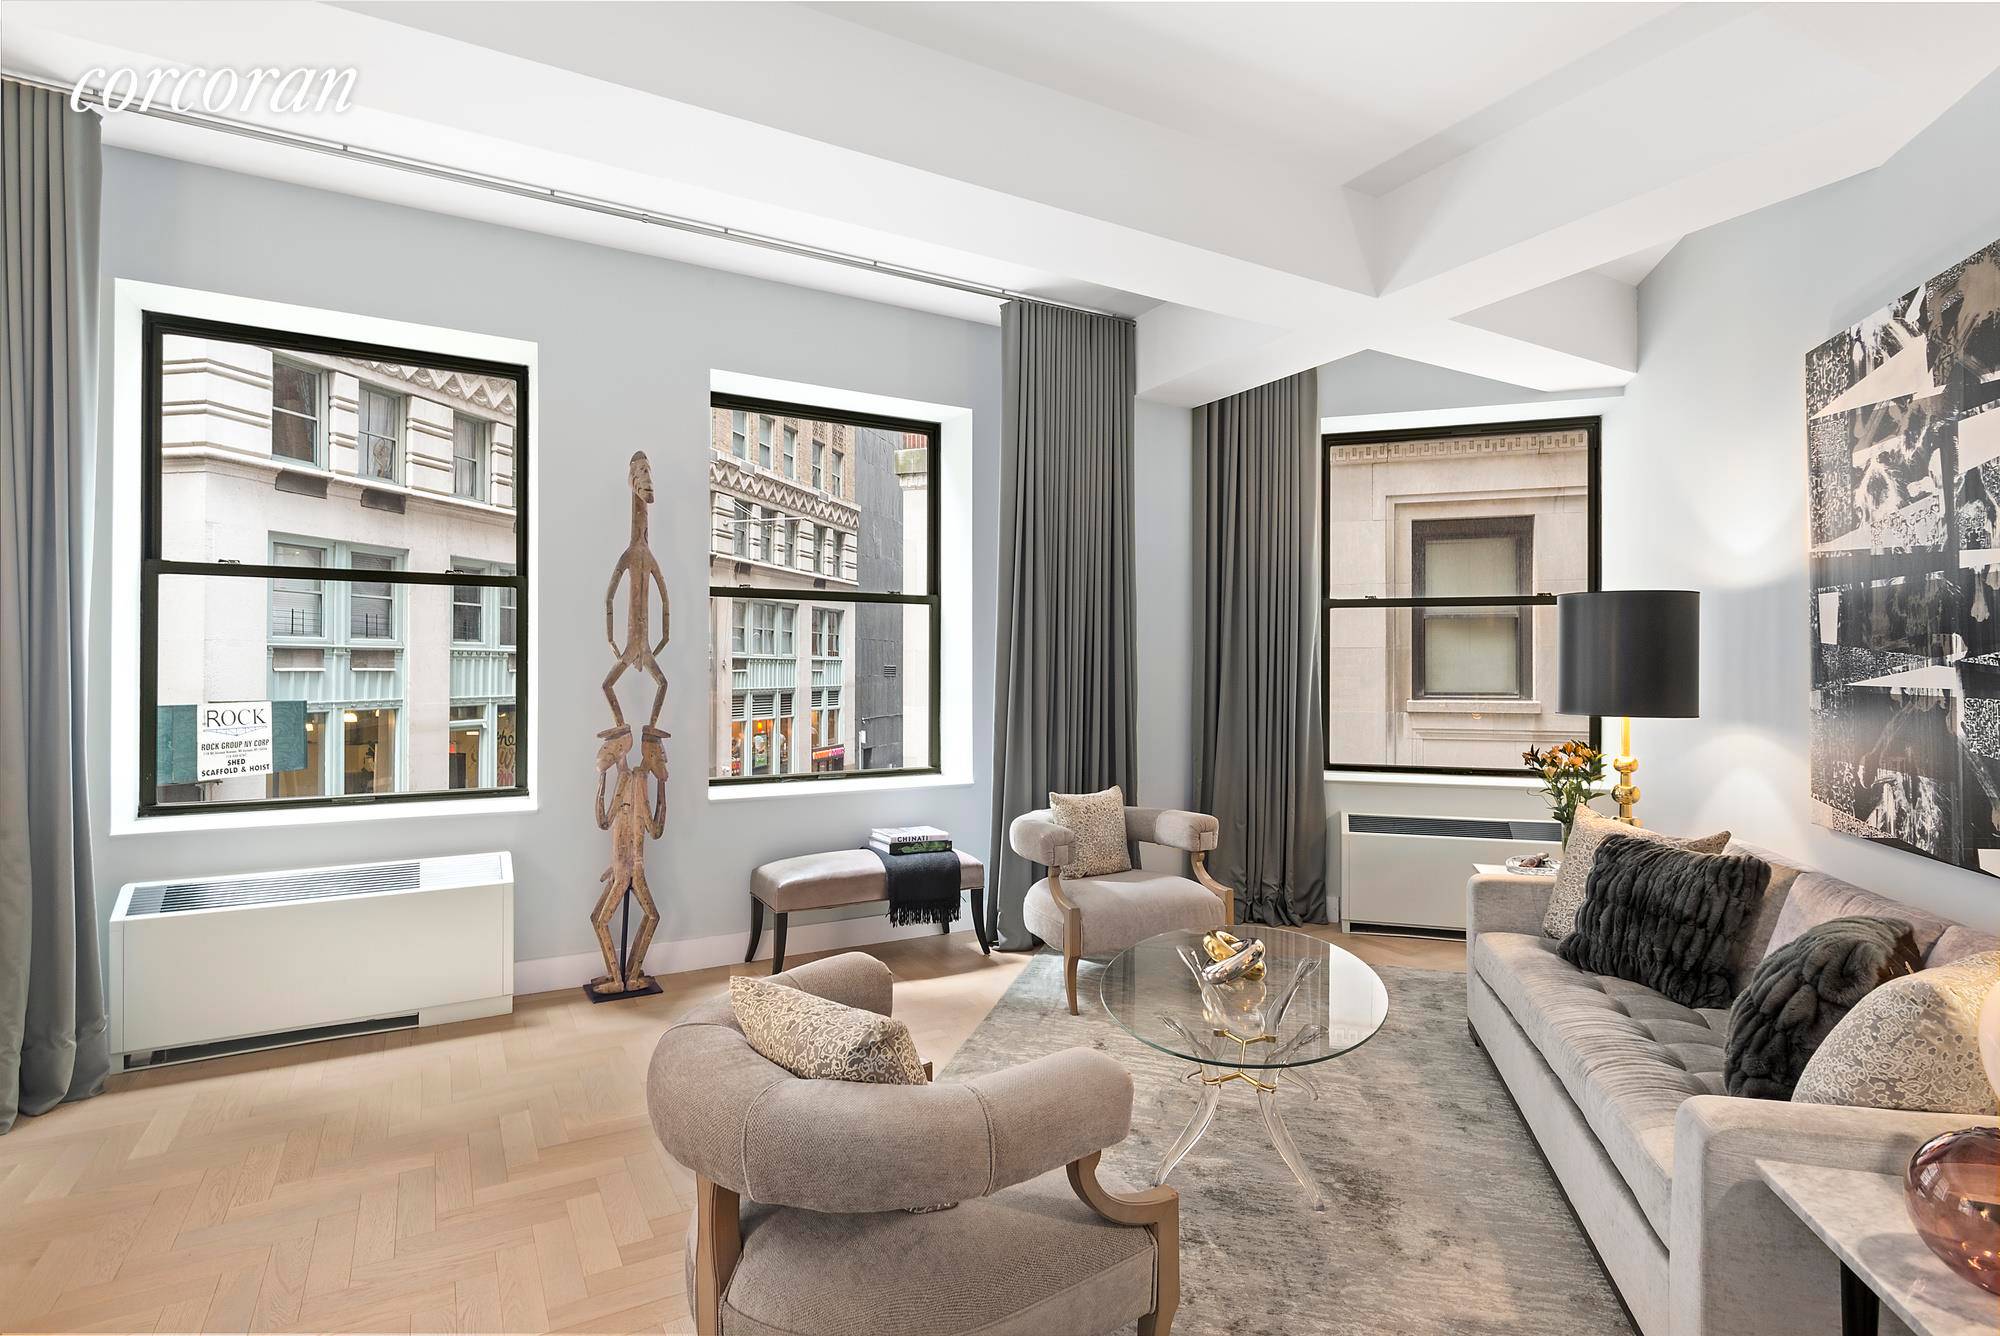 Perfectly perched over the corner of John and Gold Streets, this expansive 2 bedroom and 2 bath corner loft boasts soaring 11 foot beamed ceilings and refined modern finishes.